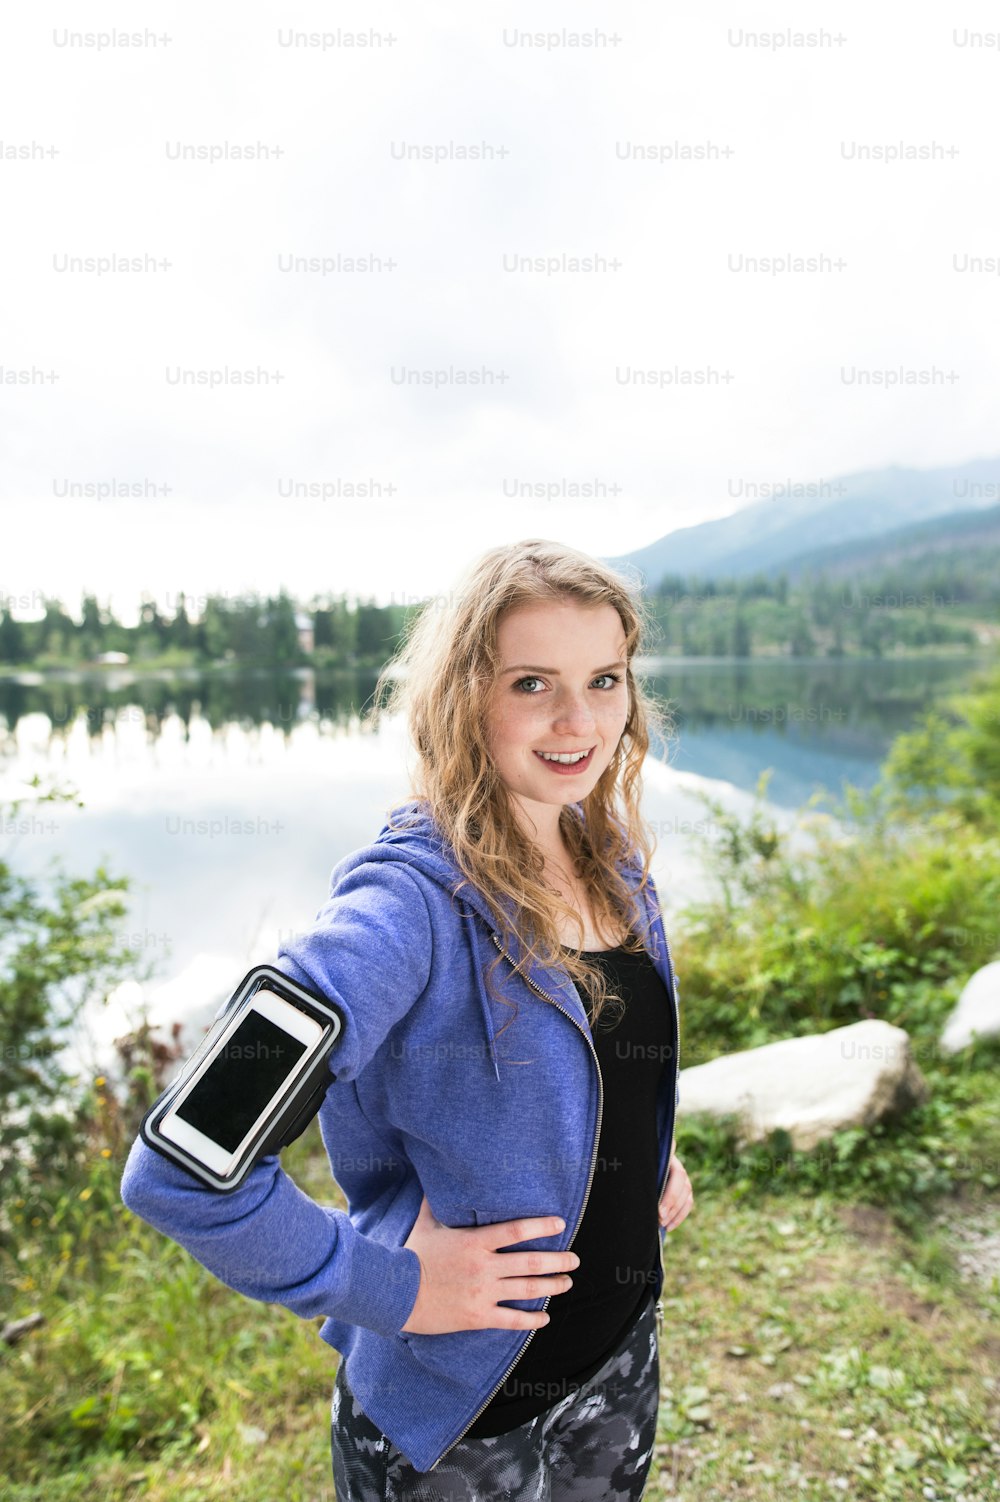 Beautiful young woman with smart phone in blue sweatshirt at the lake in green nature. Using a fitness app for tracking weight loss progress, running goal or summary of her run.